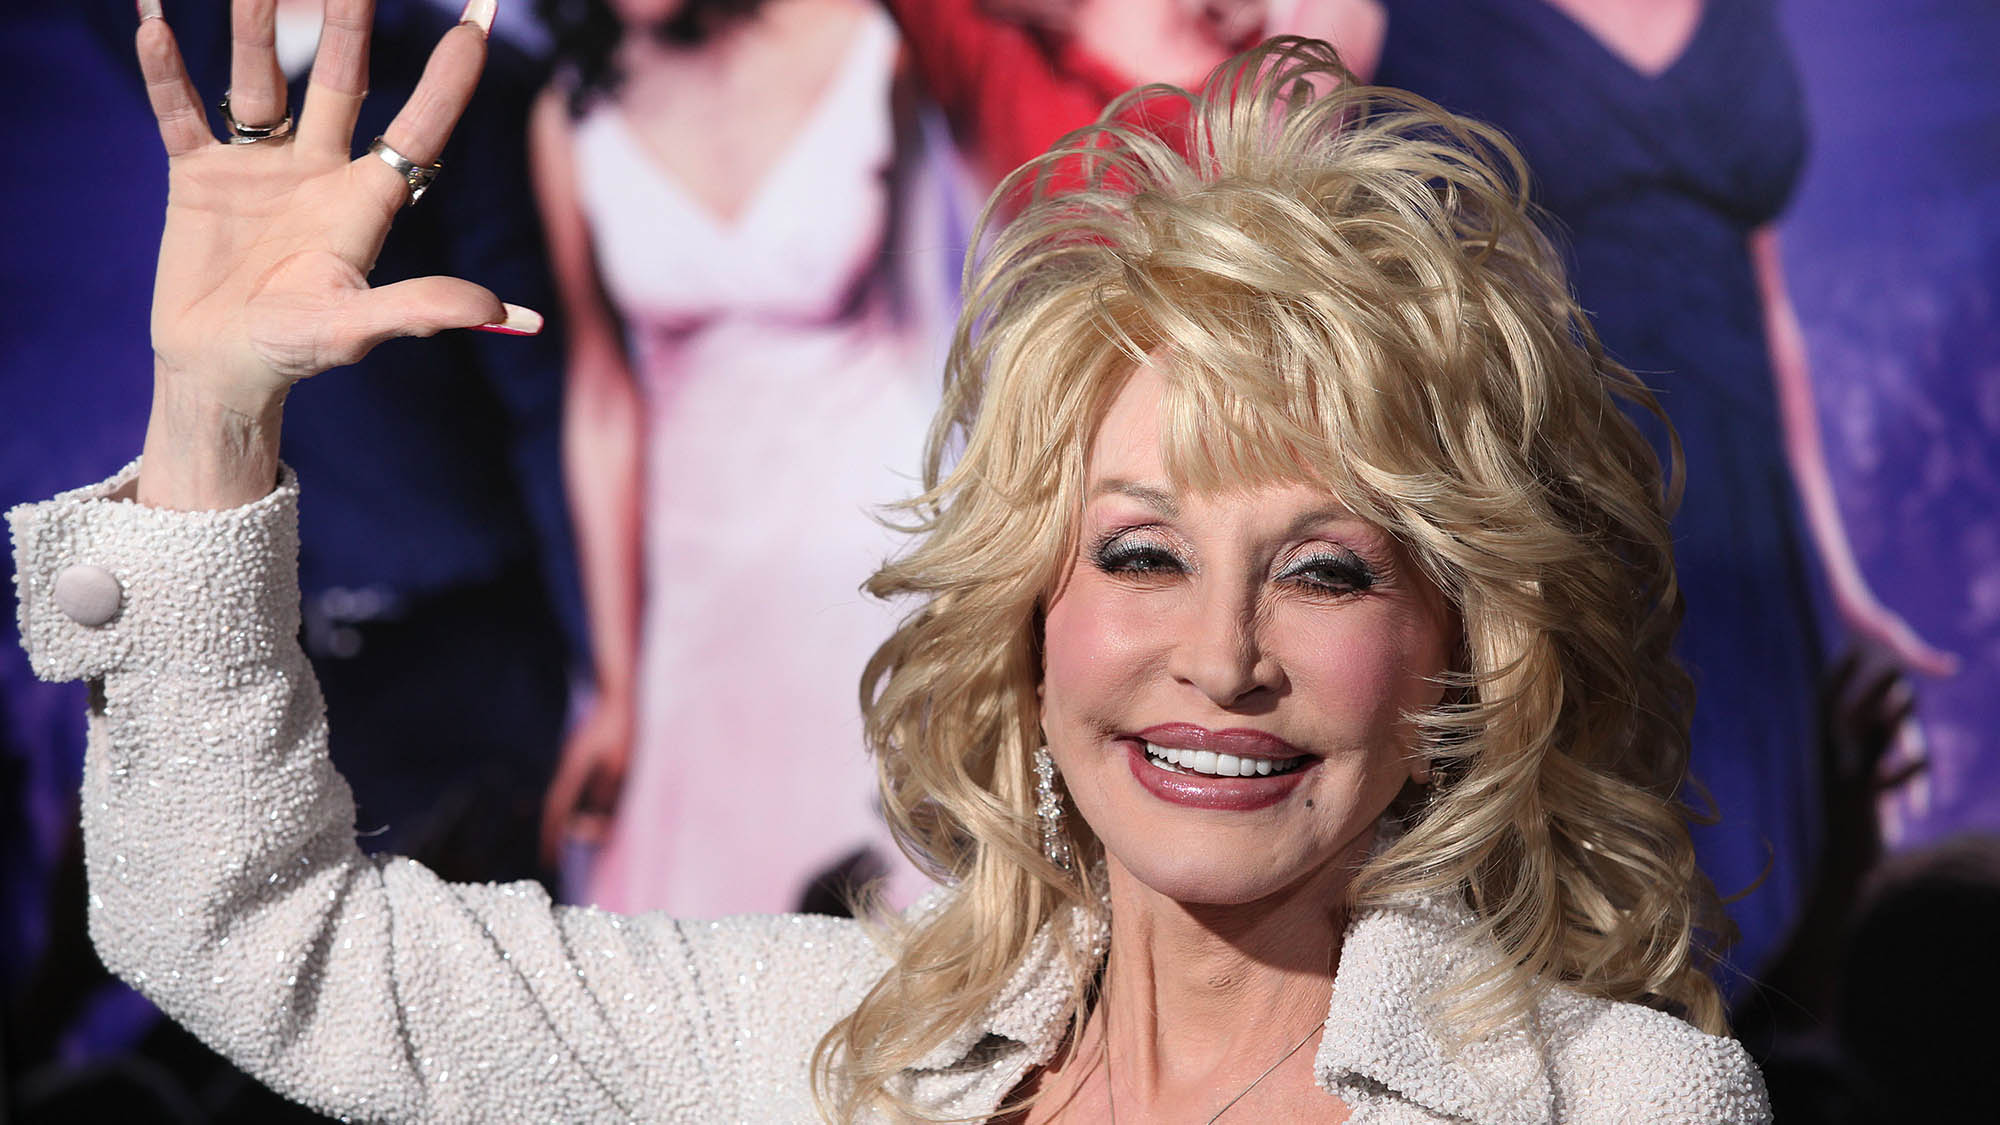 How marketers measure the magic of Dolly Parton